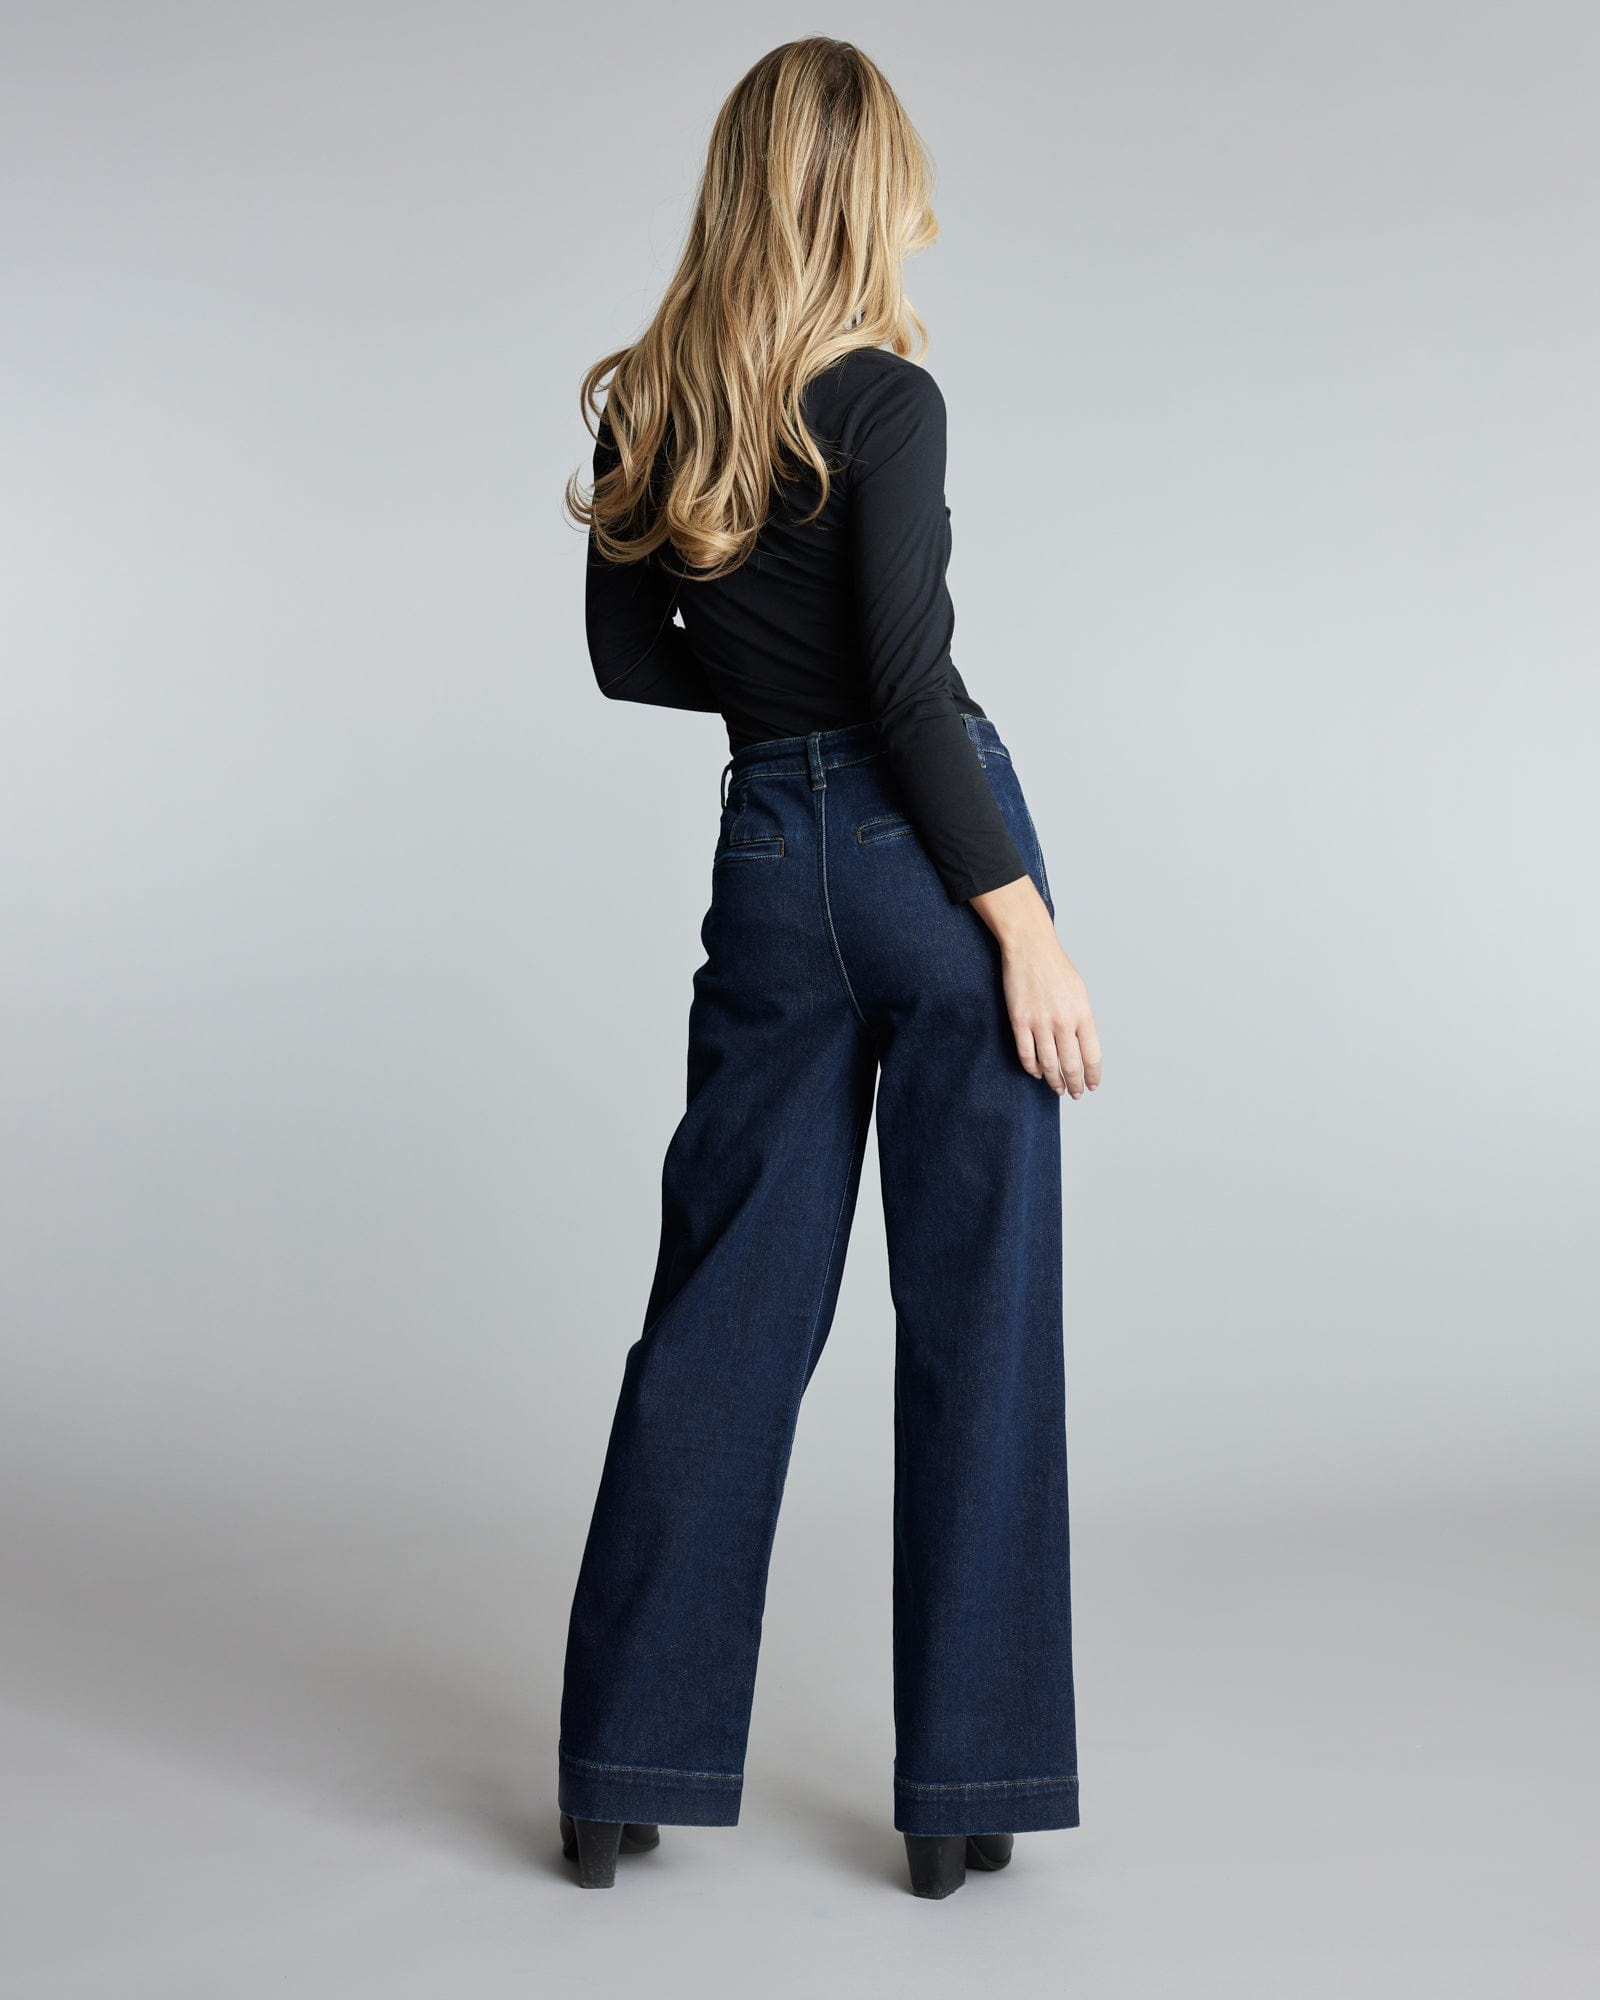 Woman in pleated trouser jeans.